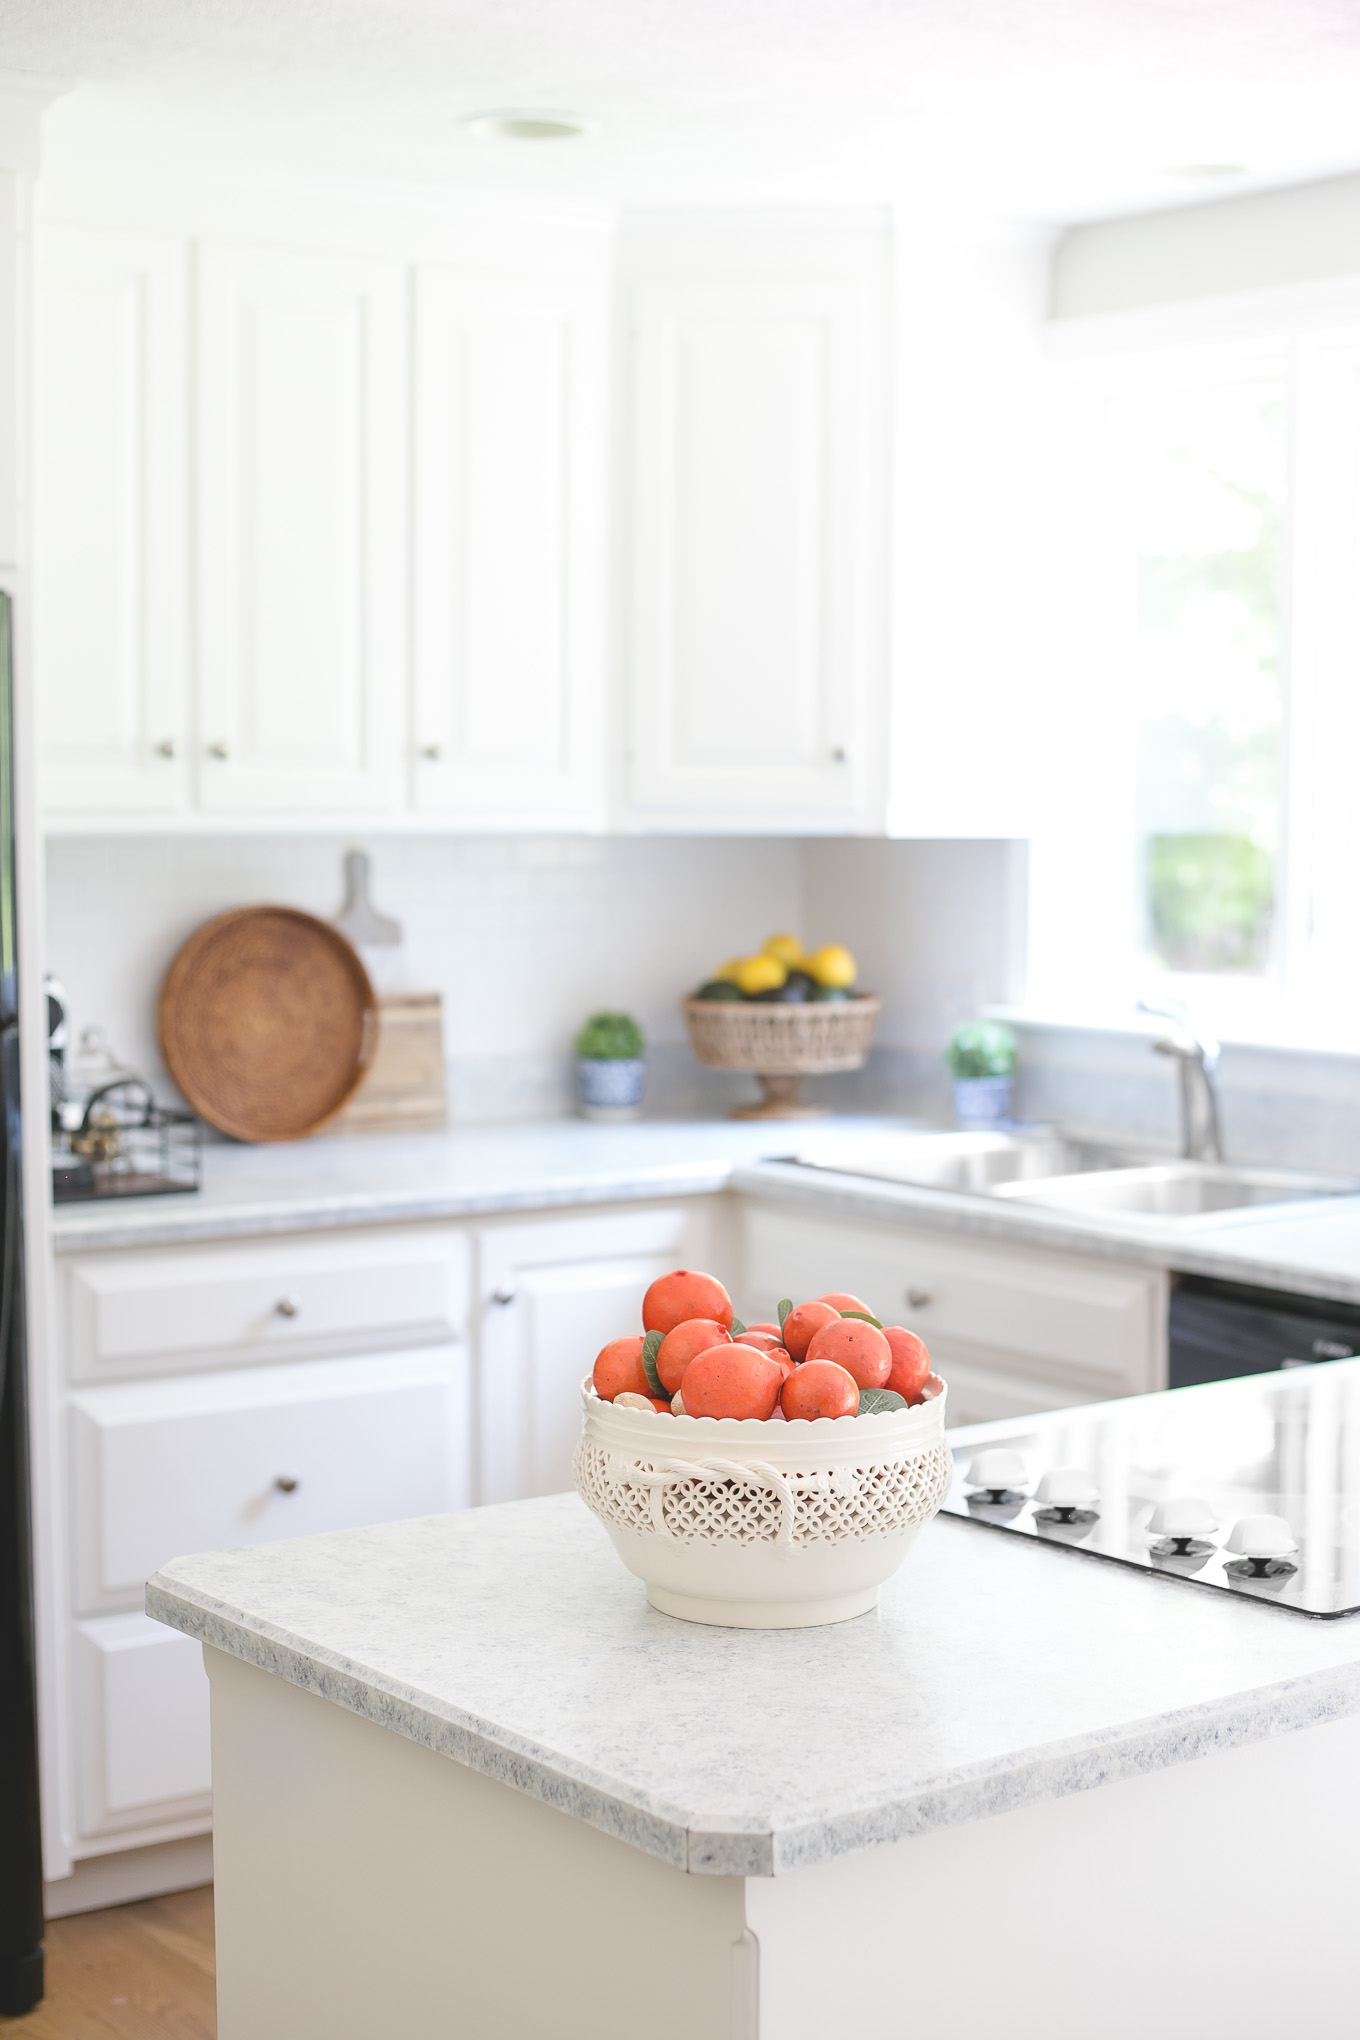 How I Painted My Kitchen Countertops, Painting Kitchen Cabinets And Countertops